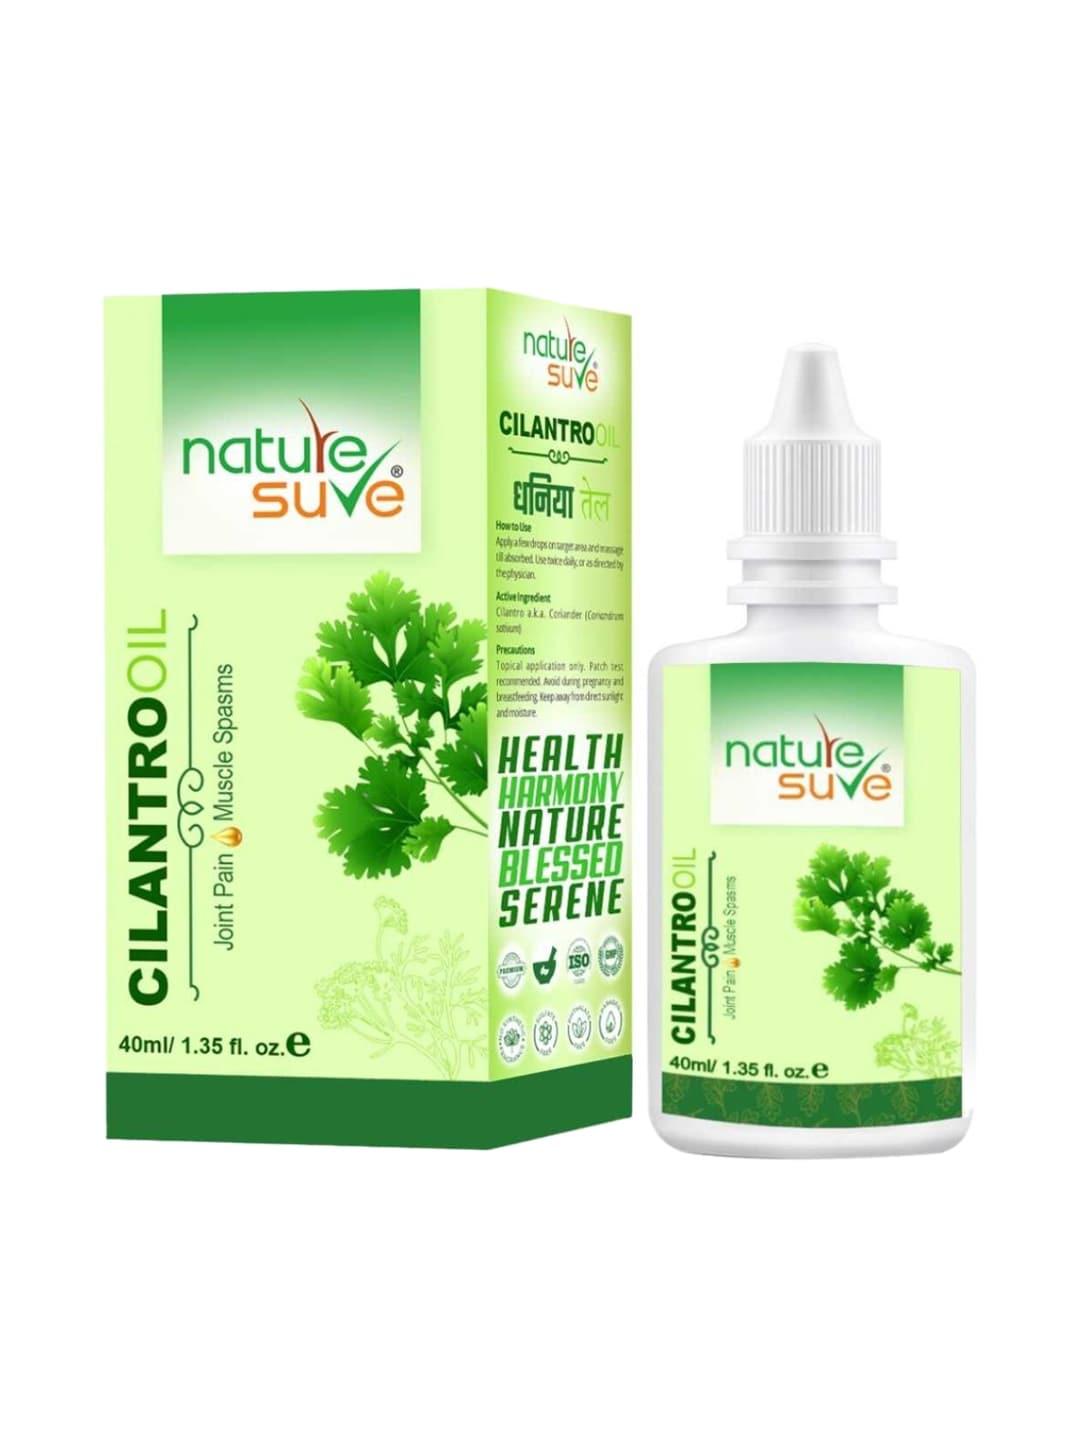 Nature Sure Cilantro Massage Oil for Joint Pain & Muscle Spasms - 40ml